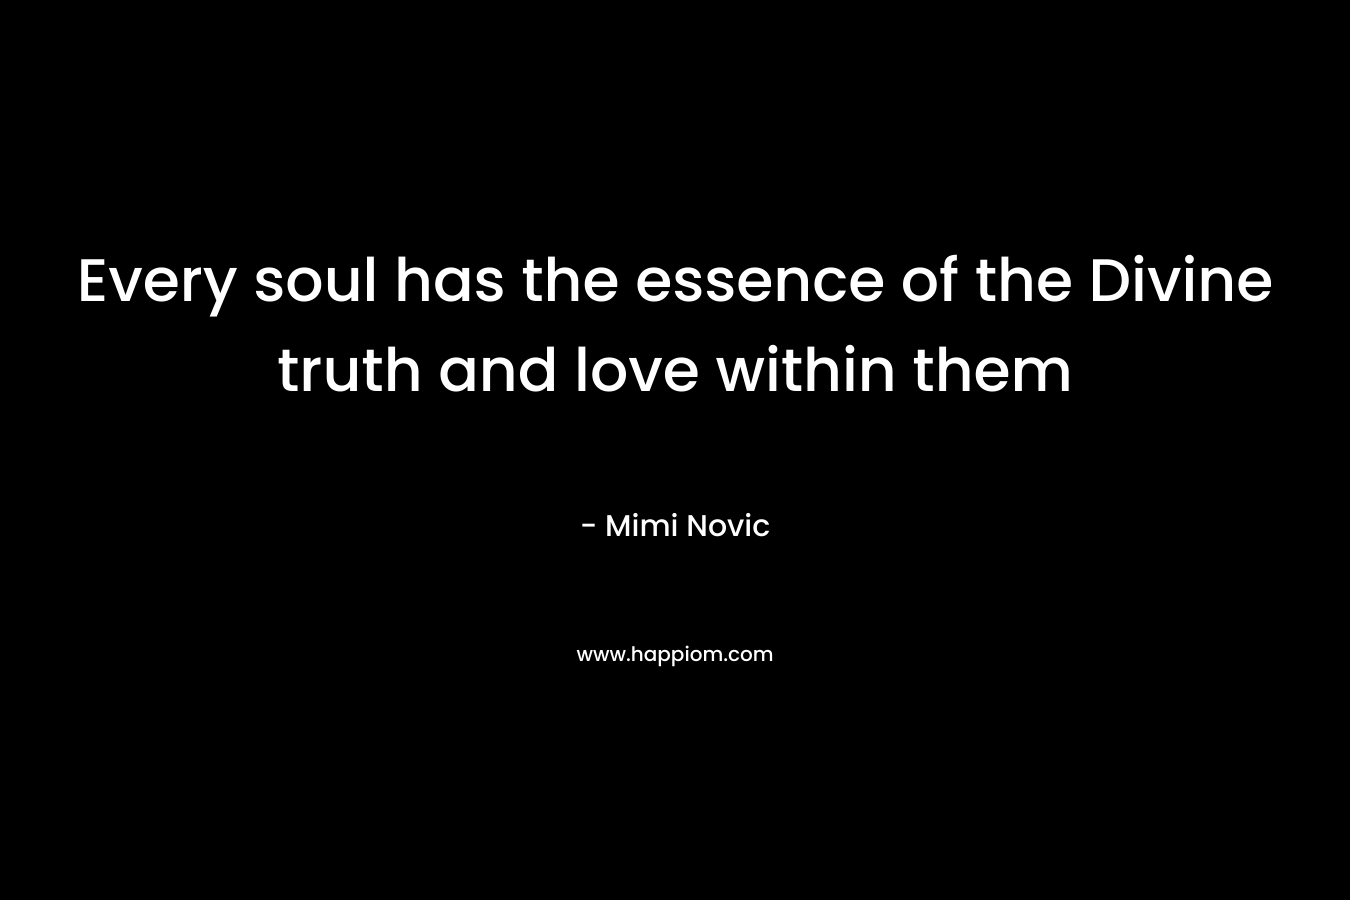 Every soul has the essence of the Divine truth and love within them – Mimi Novic